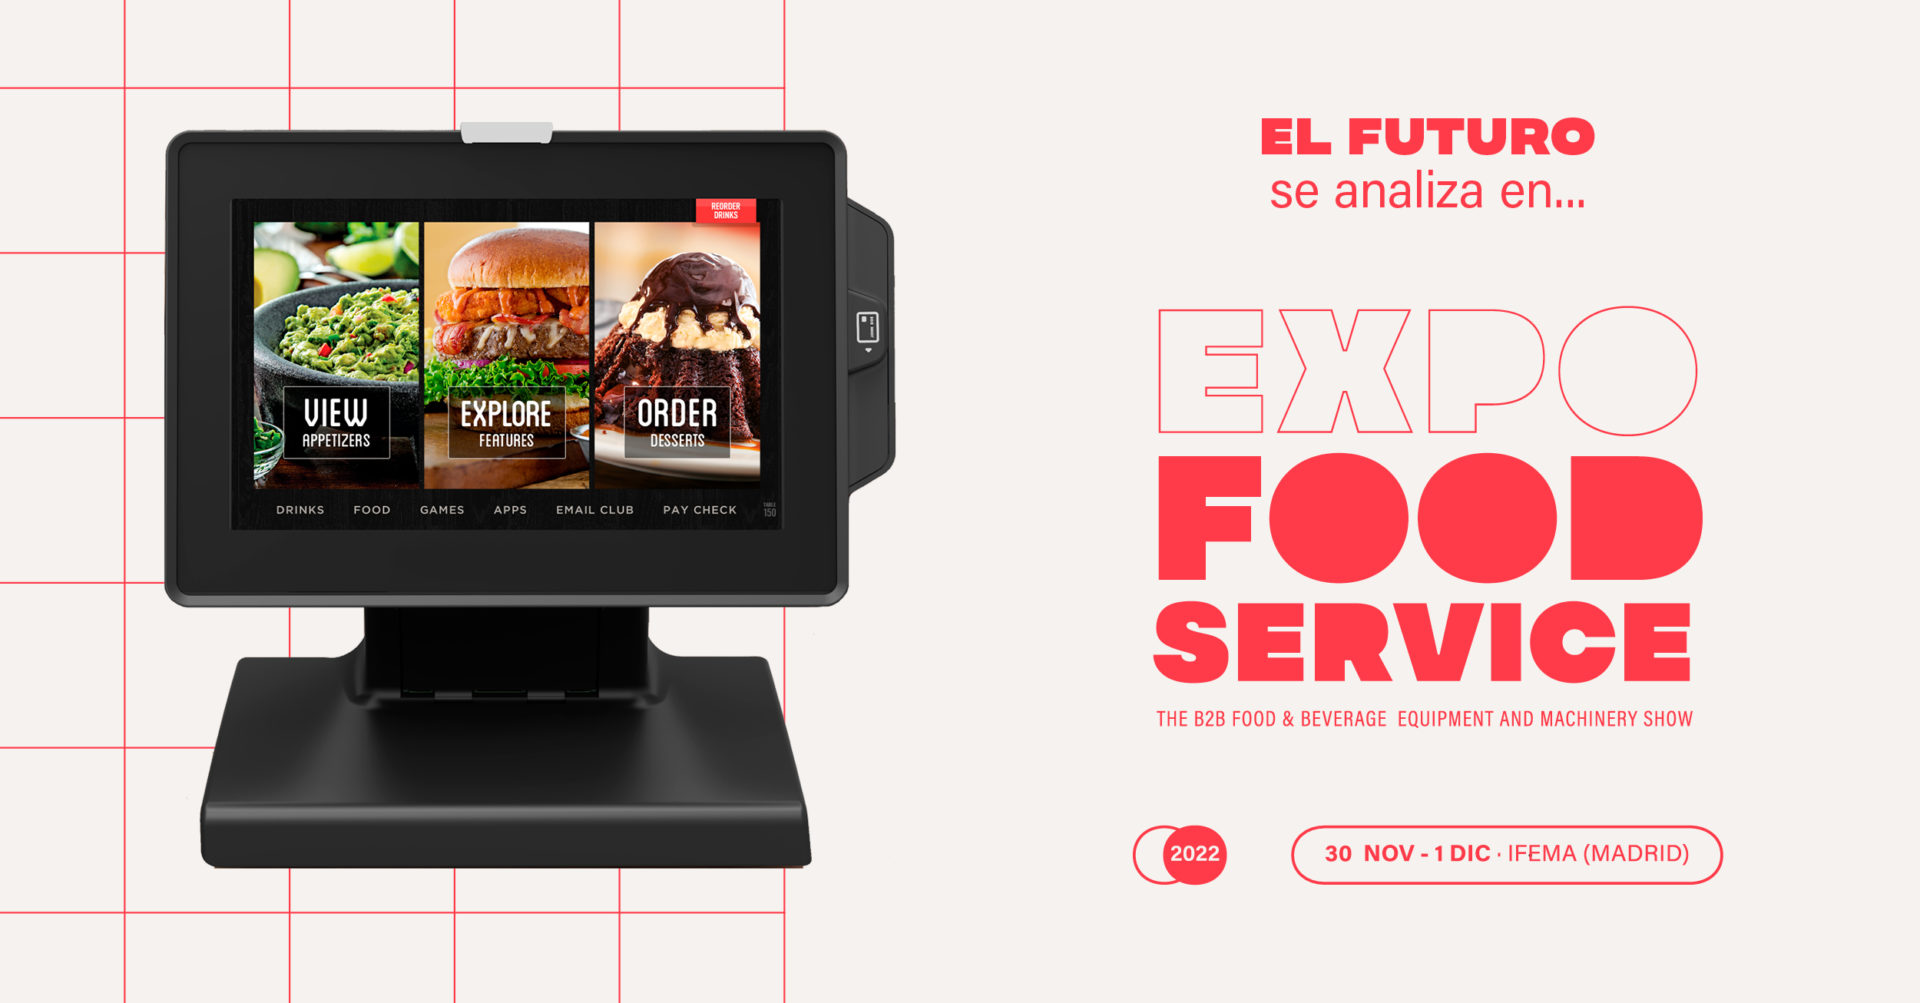 Expofoodservice 2022